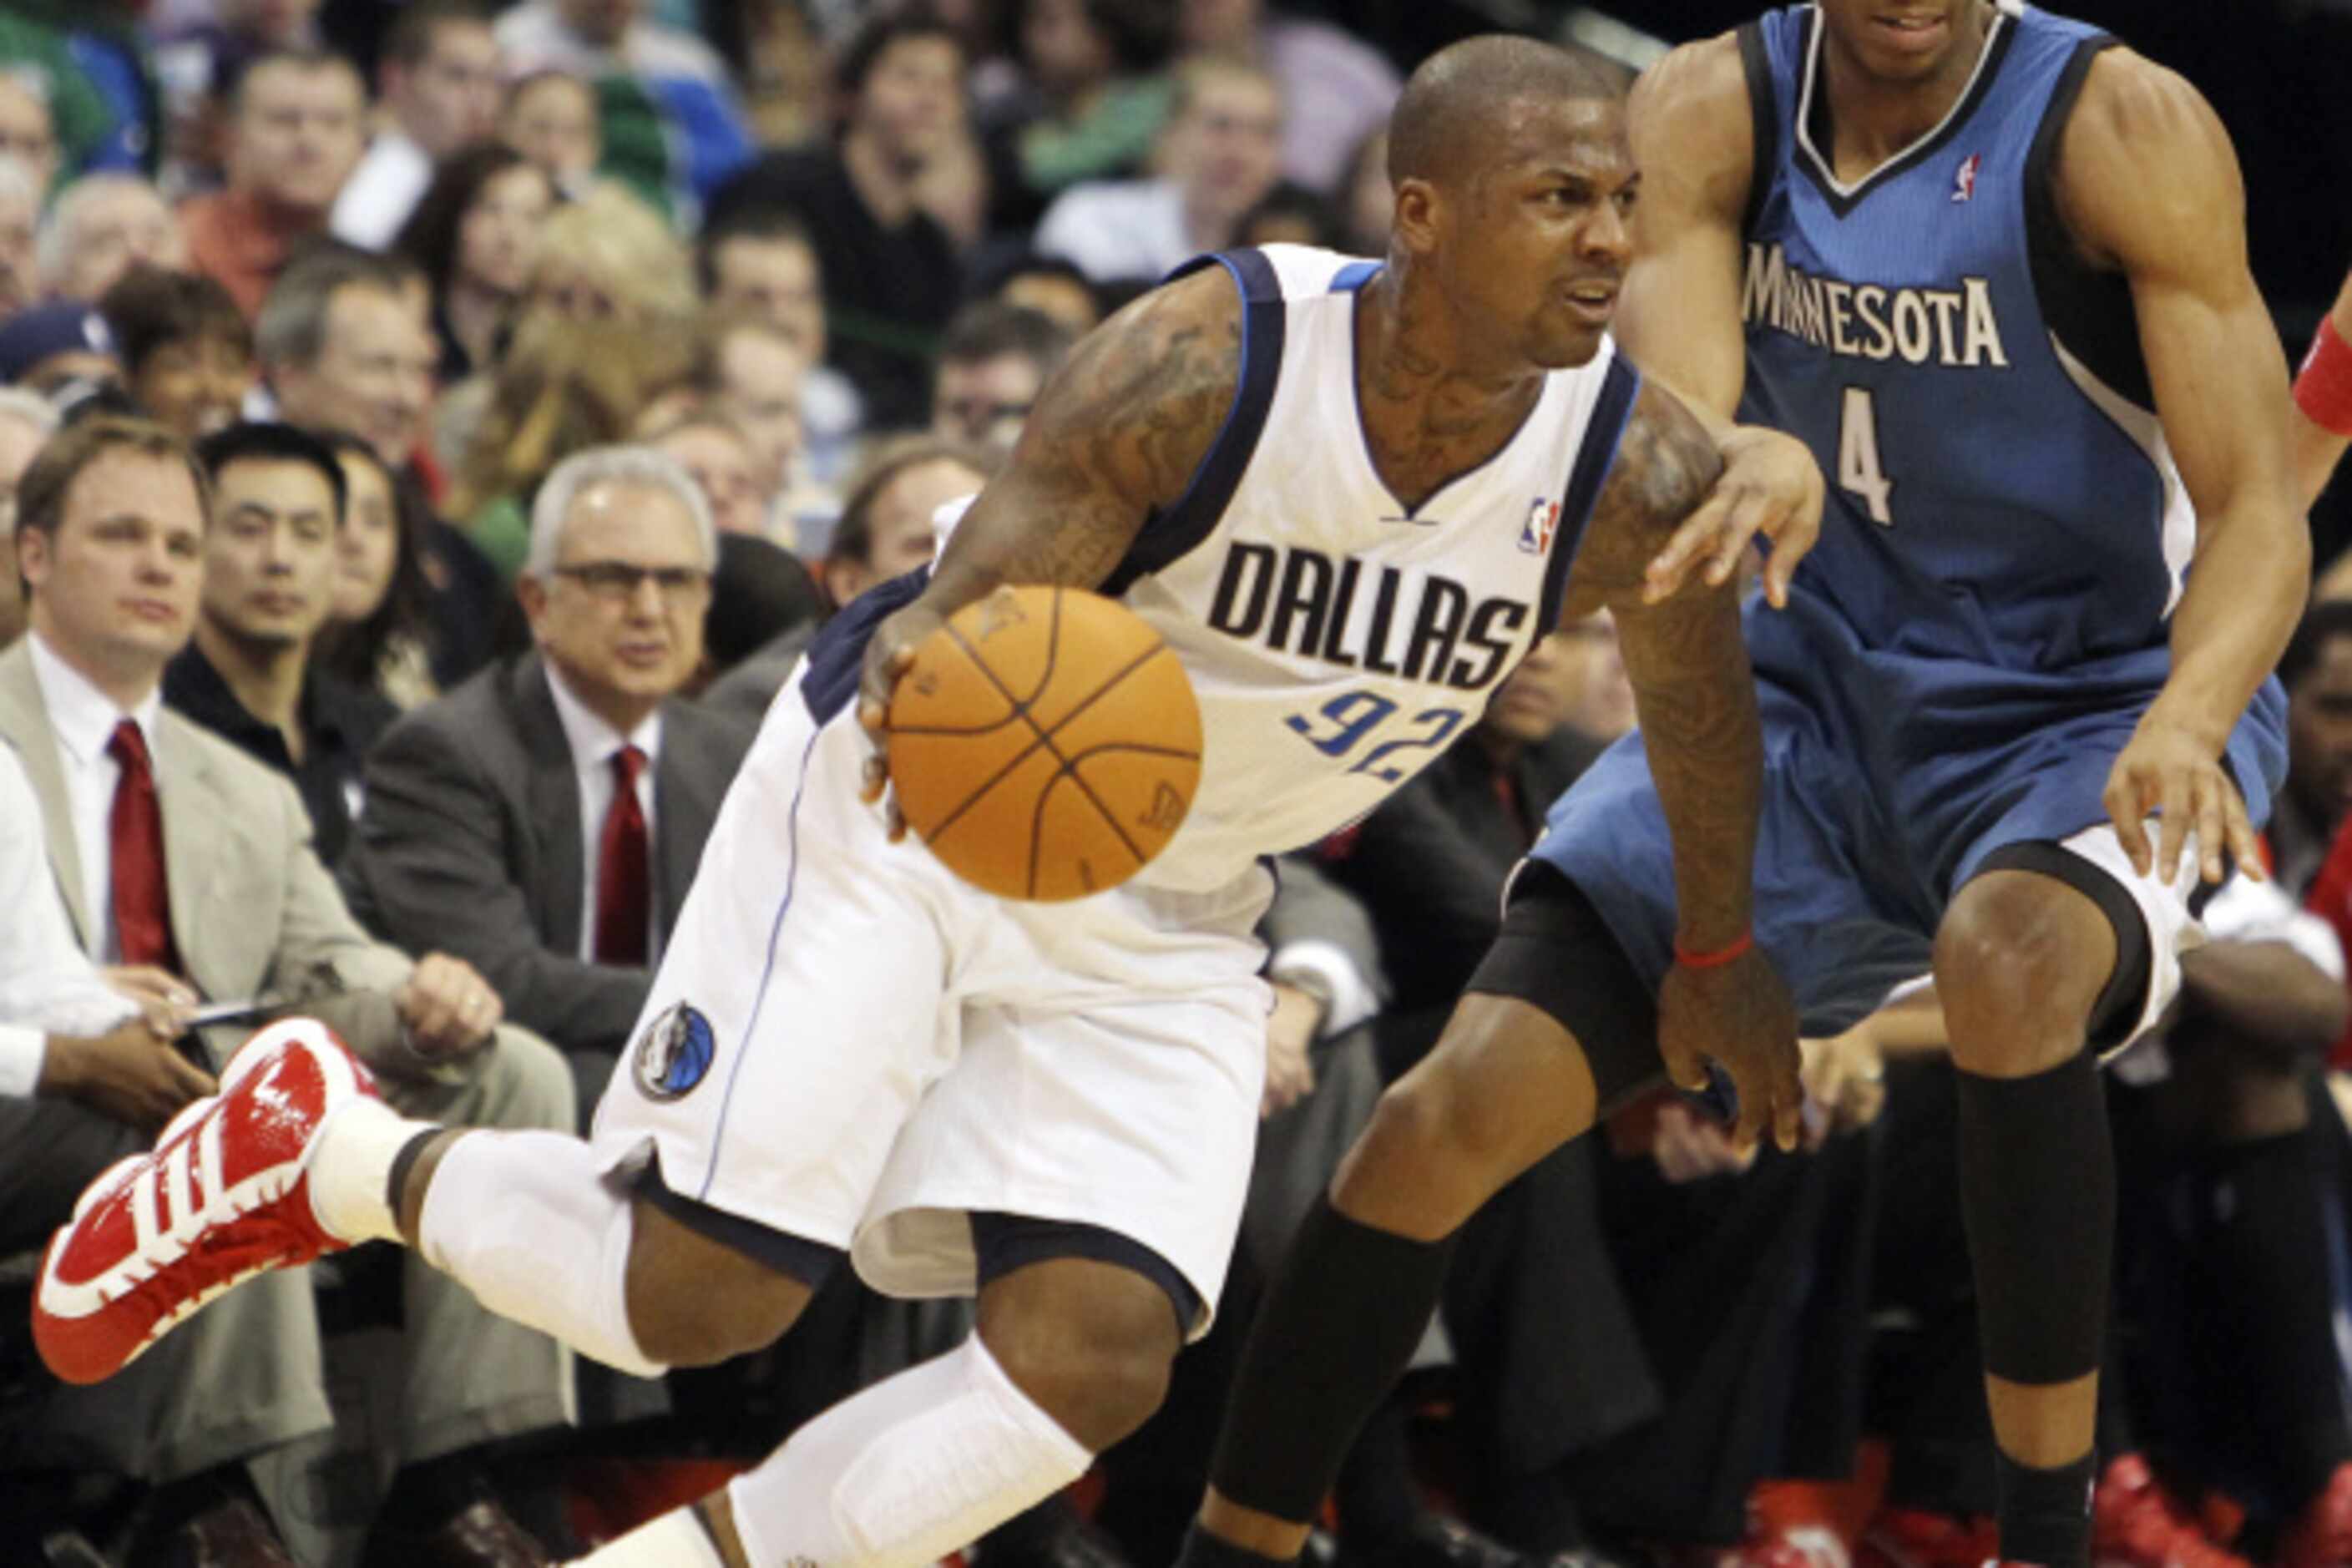 Nov. 7: With a 4-2 record, veterans Dirk Nowitzki, Jason Kidd and Jason Terry suggest to...